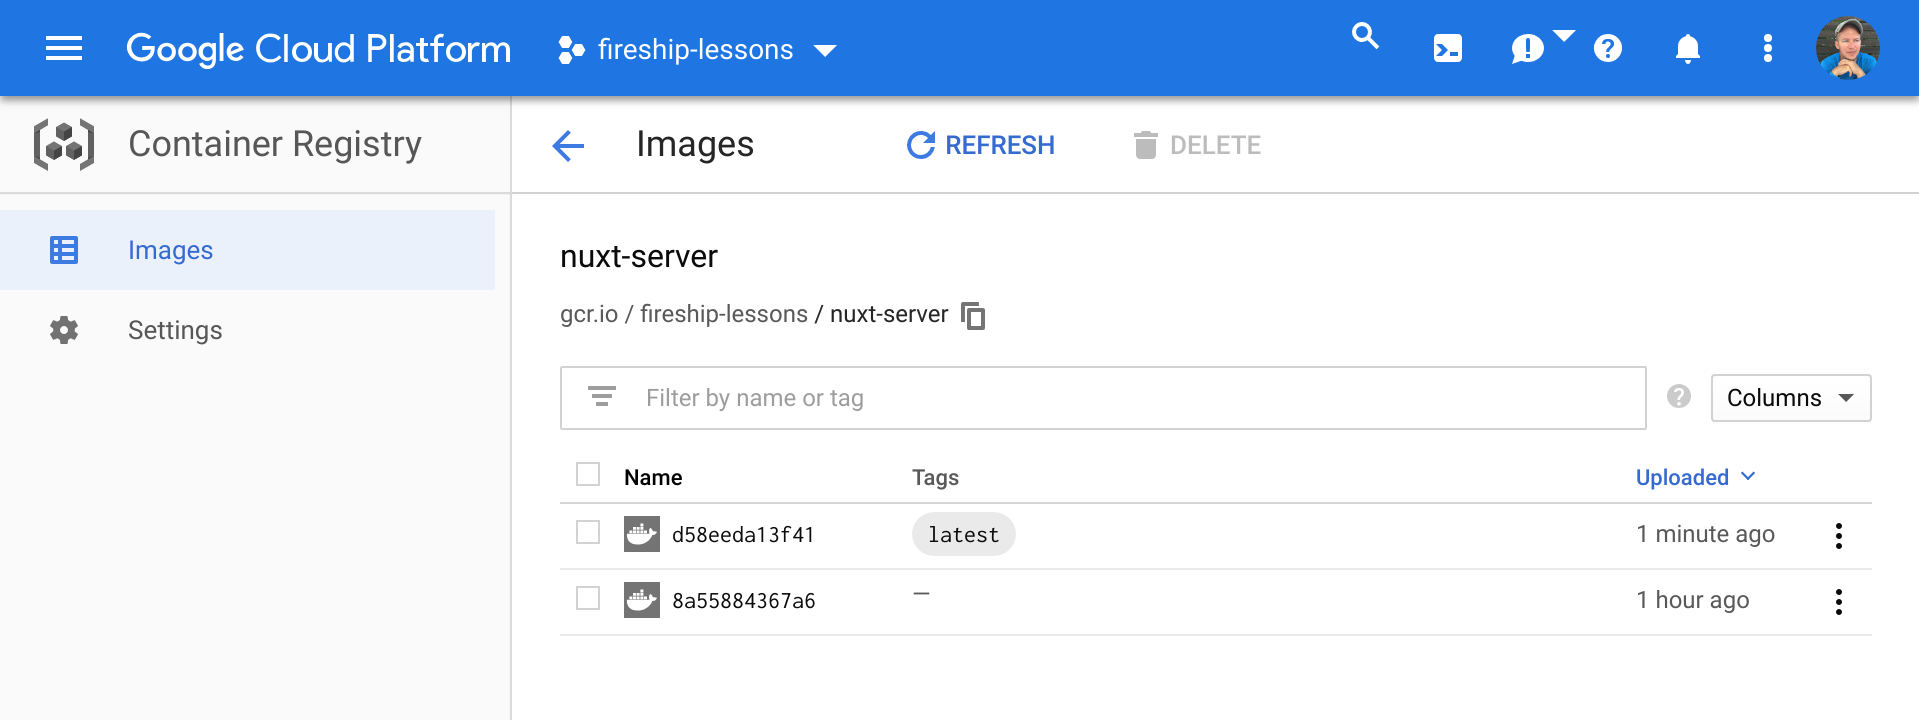 You should now see your image in the Container Registry on GCP